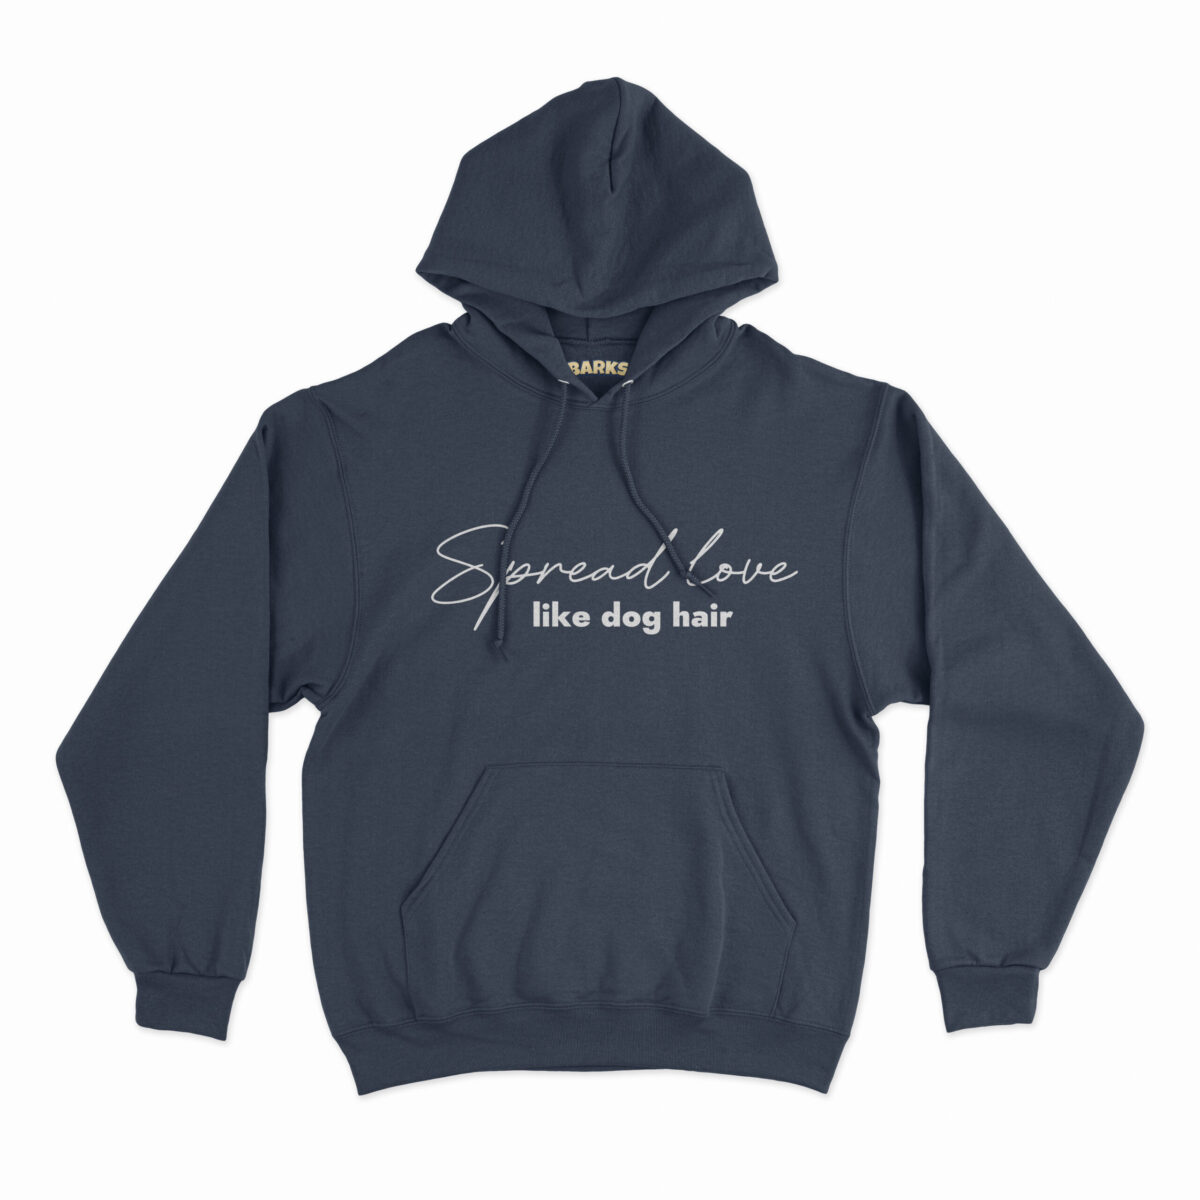 barks hoodie spread love like dog hair french navy scaled